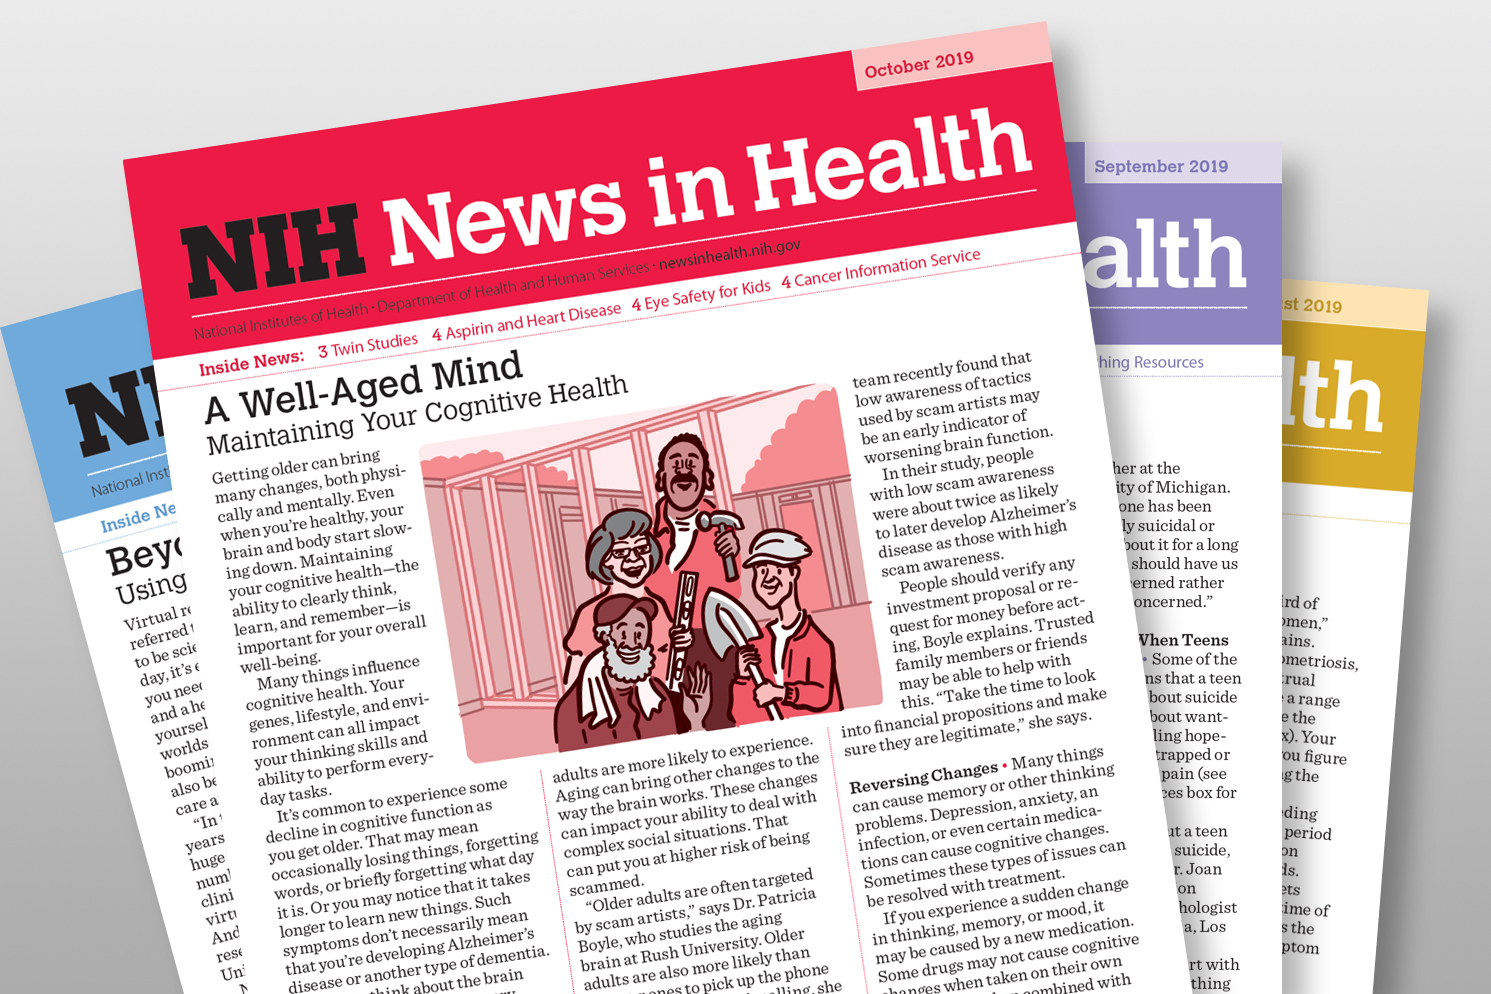 NIH News in Health covers fanned out.